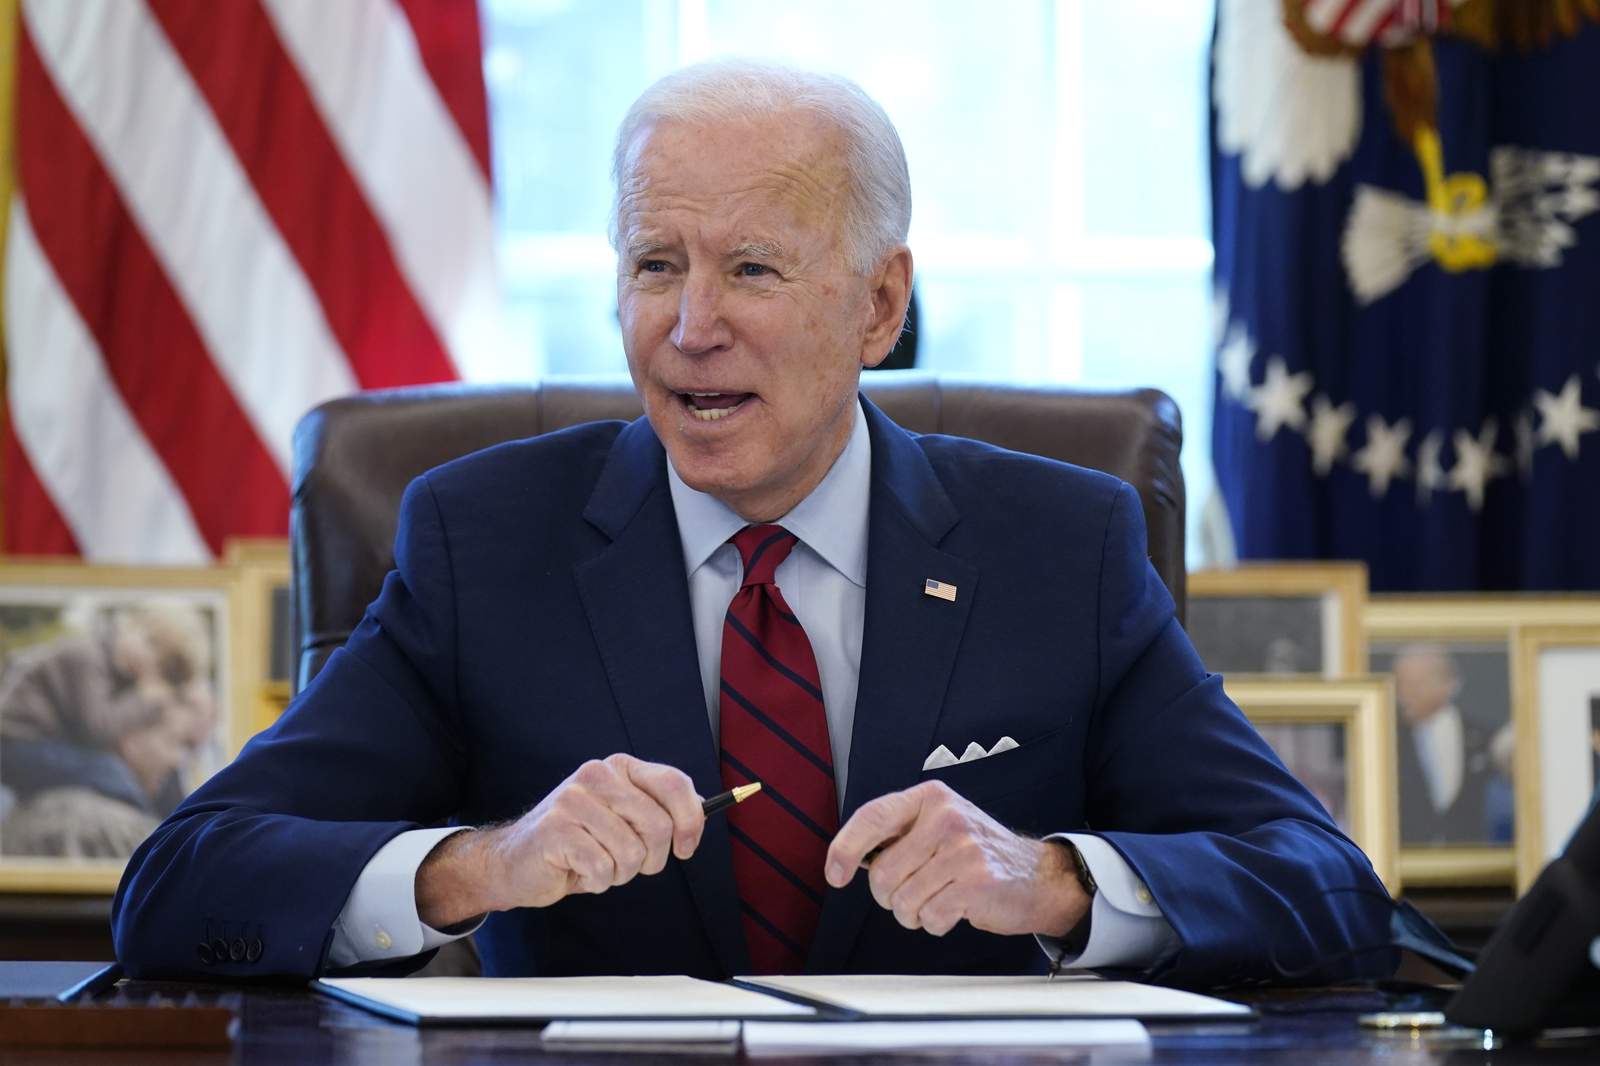 Biden faces questions about commitment to minimum wage hike